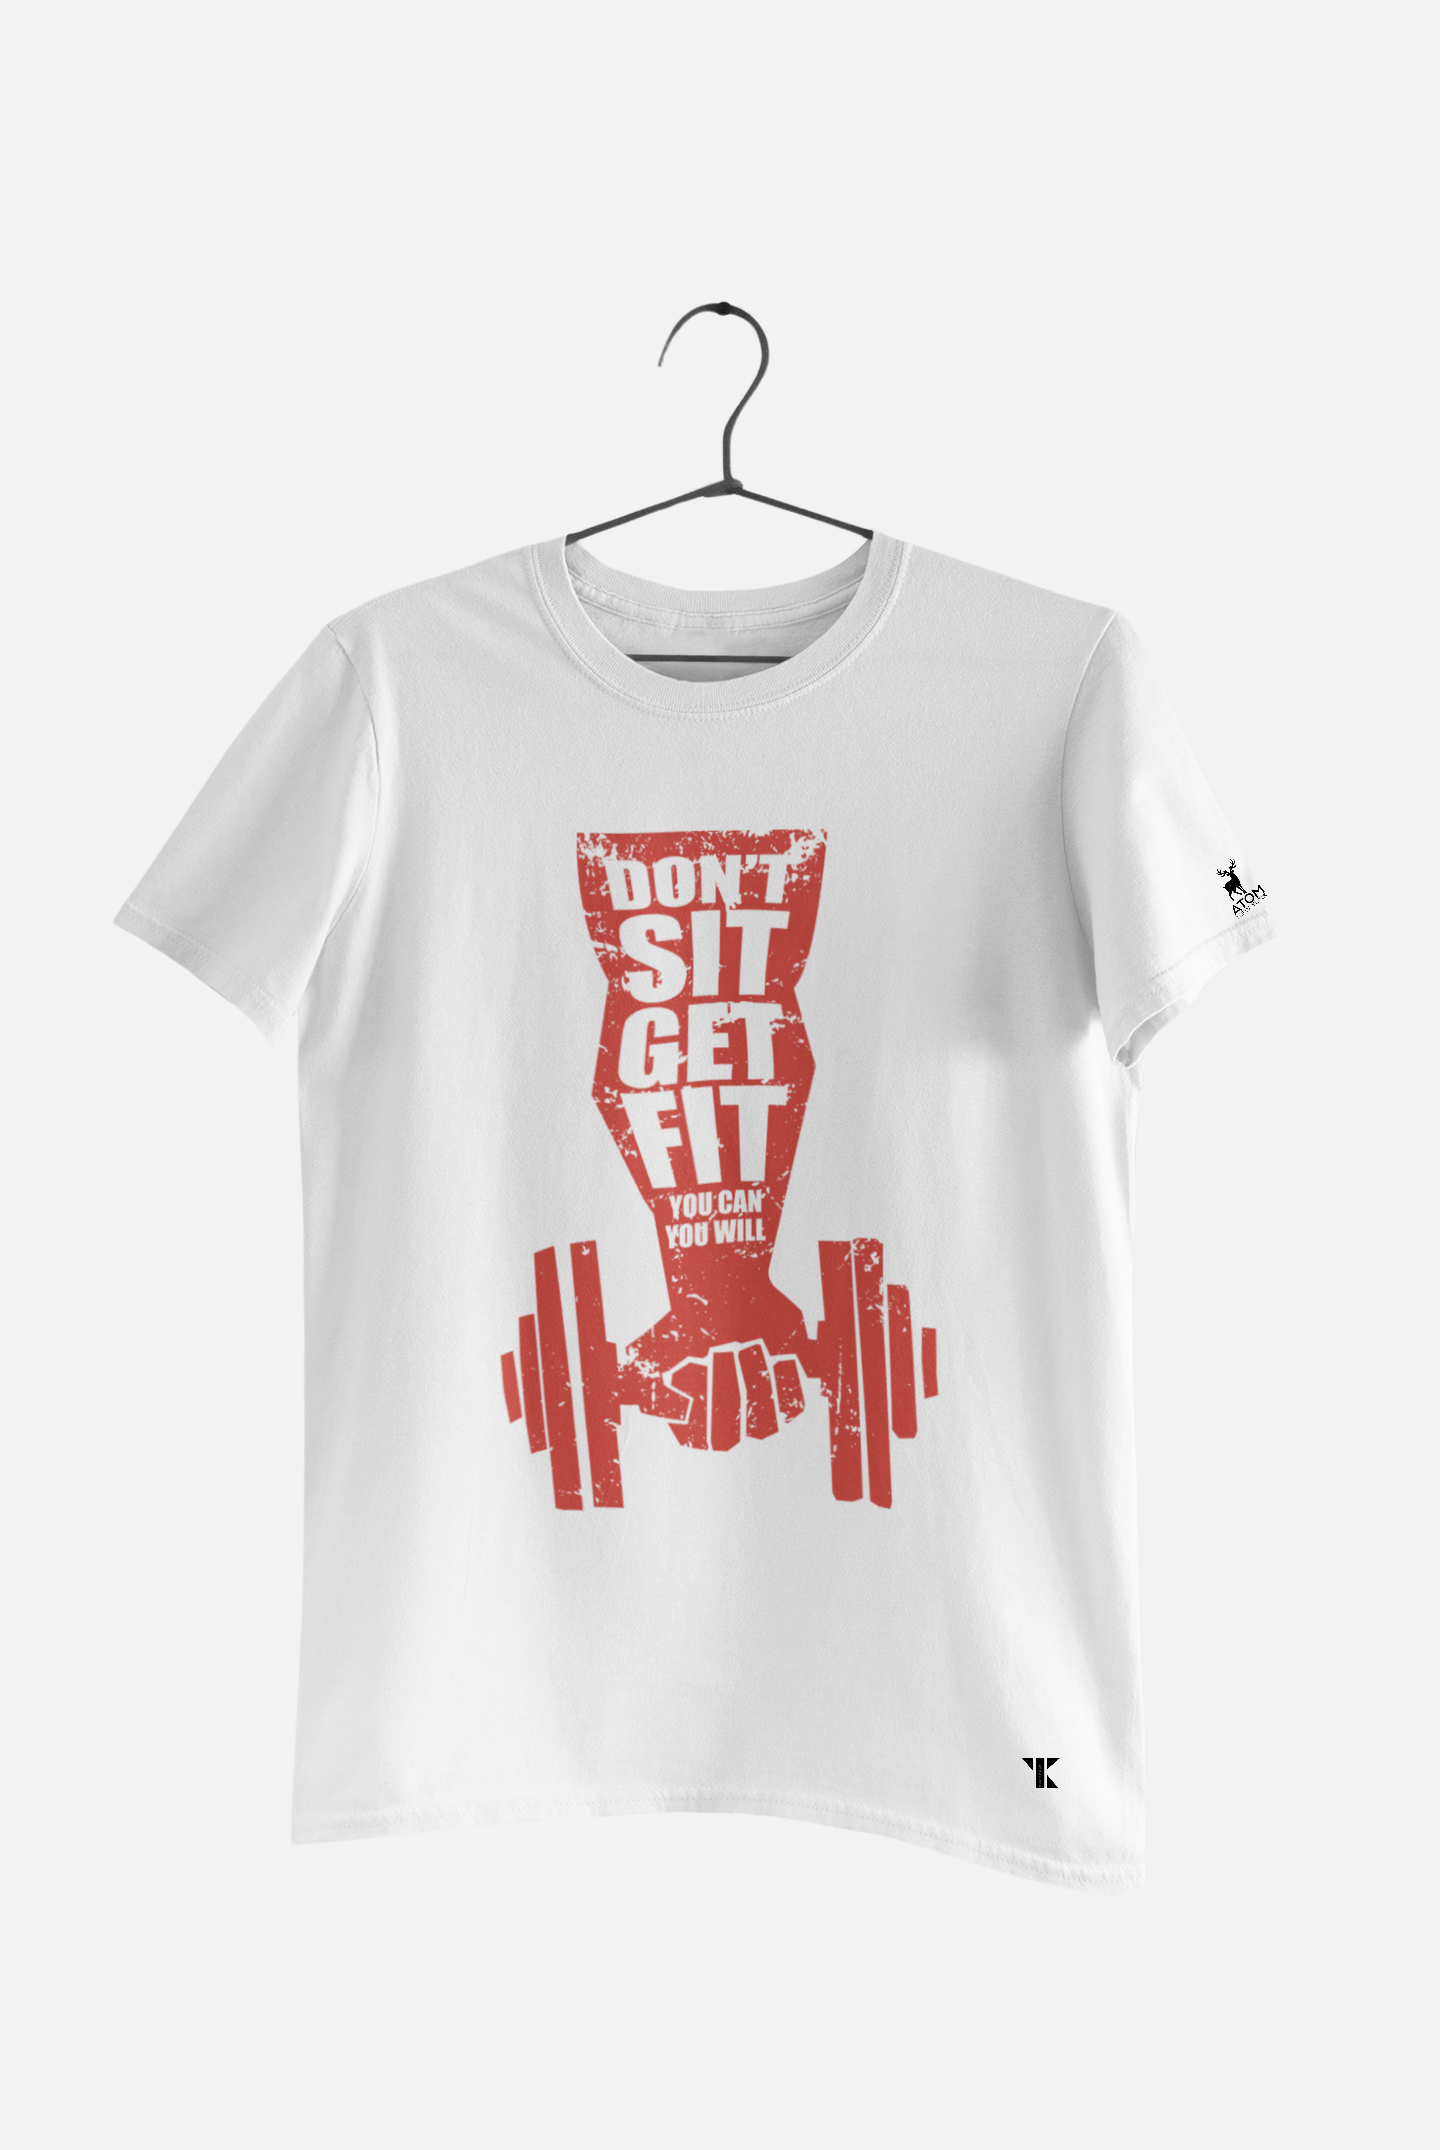 Don't Sit Get Fit White Pure Cotton T-Shirt For Men | Tarun Kapoor Collection